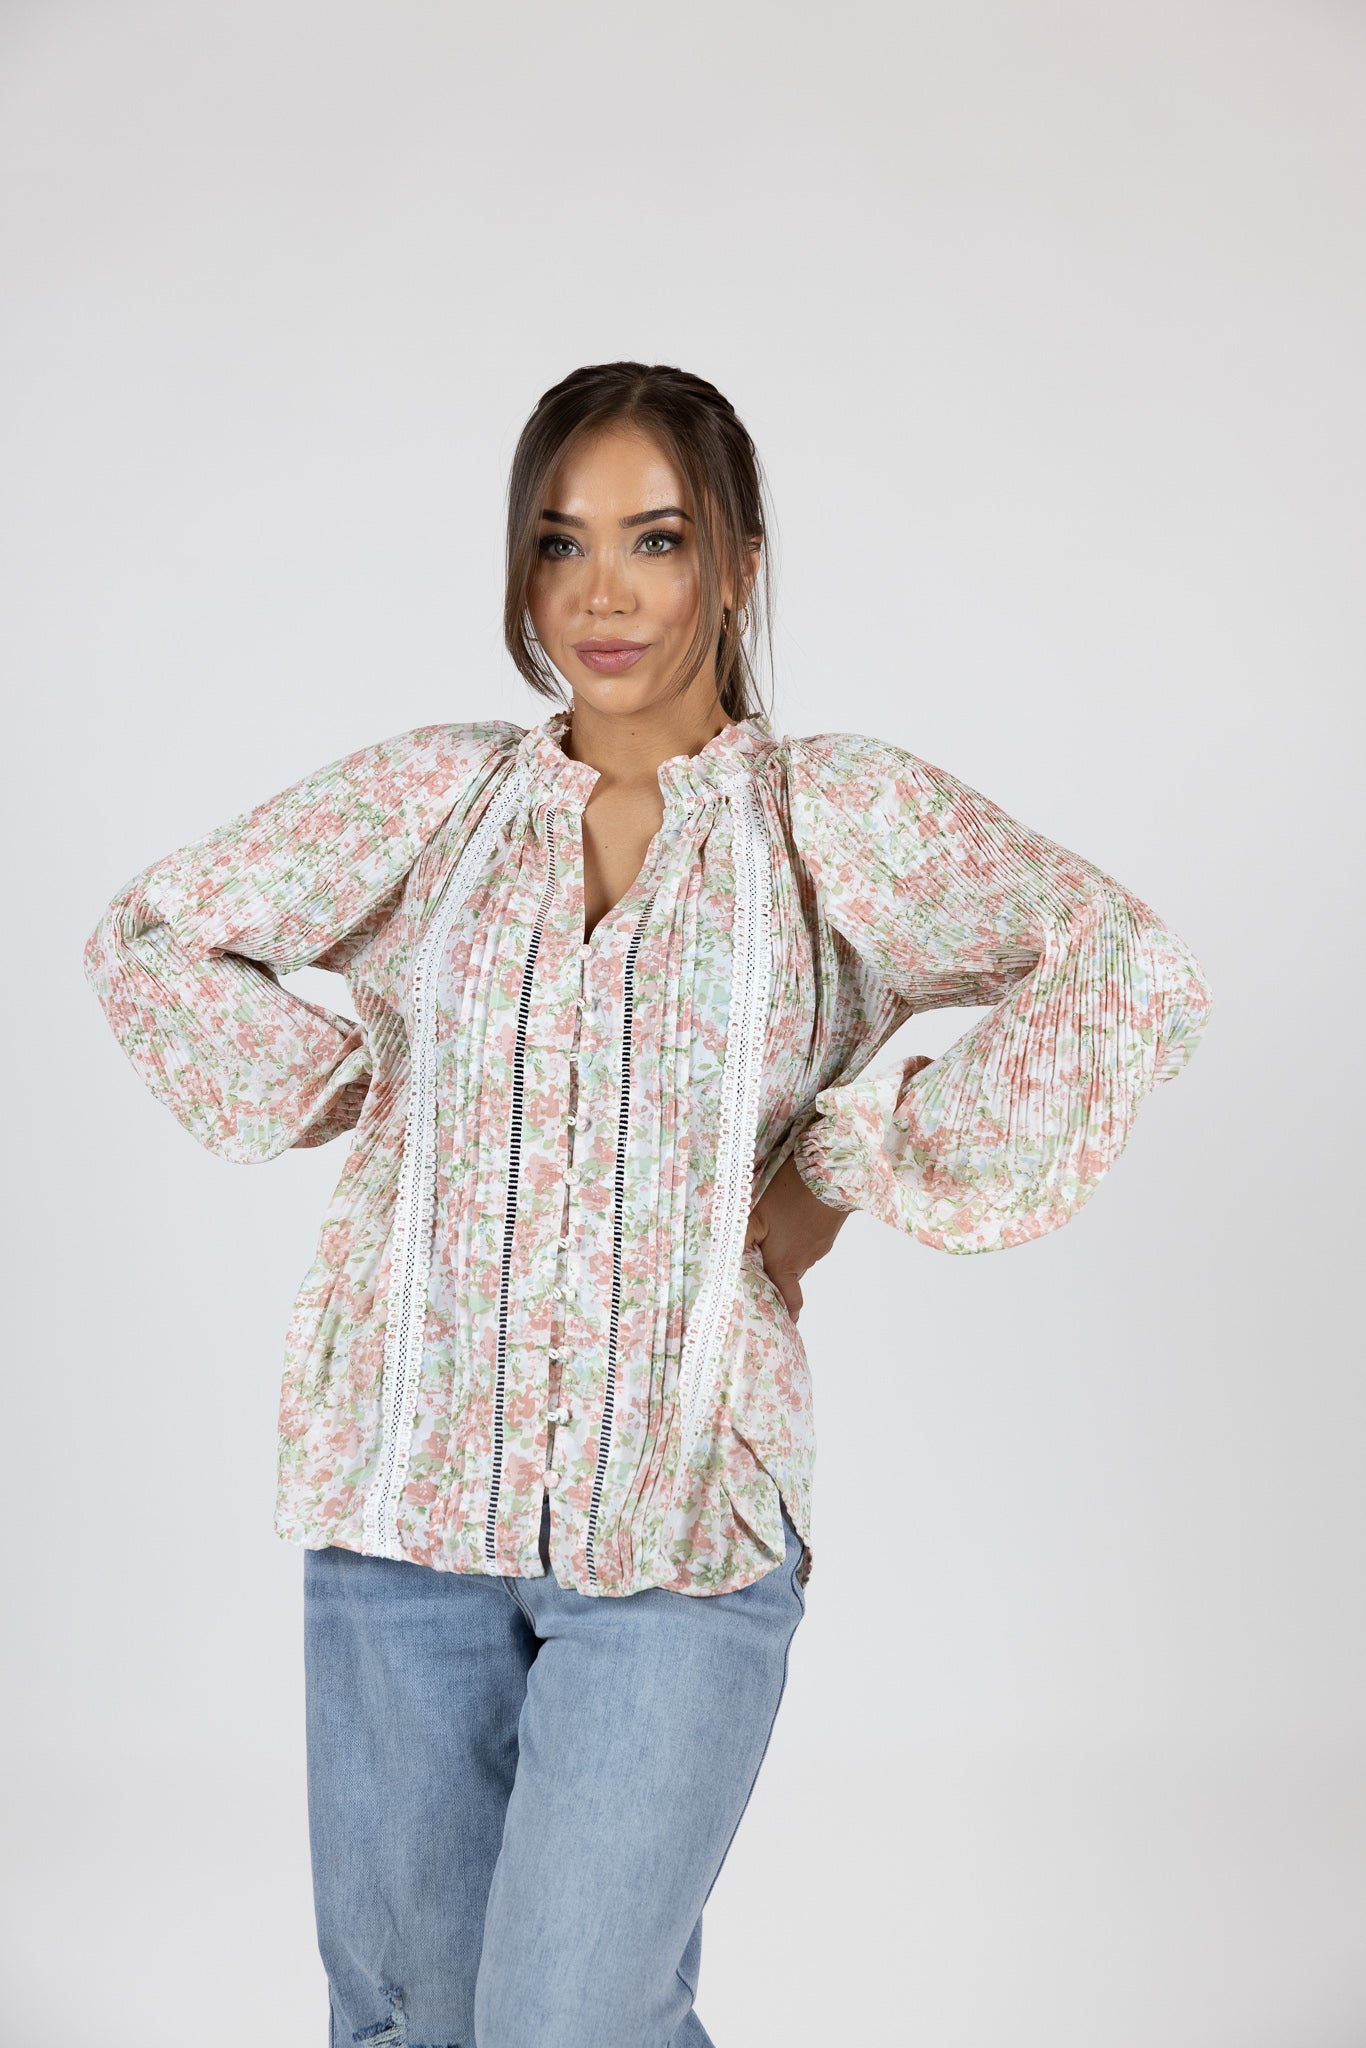 34424-WHI-blouse-top